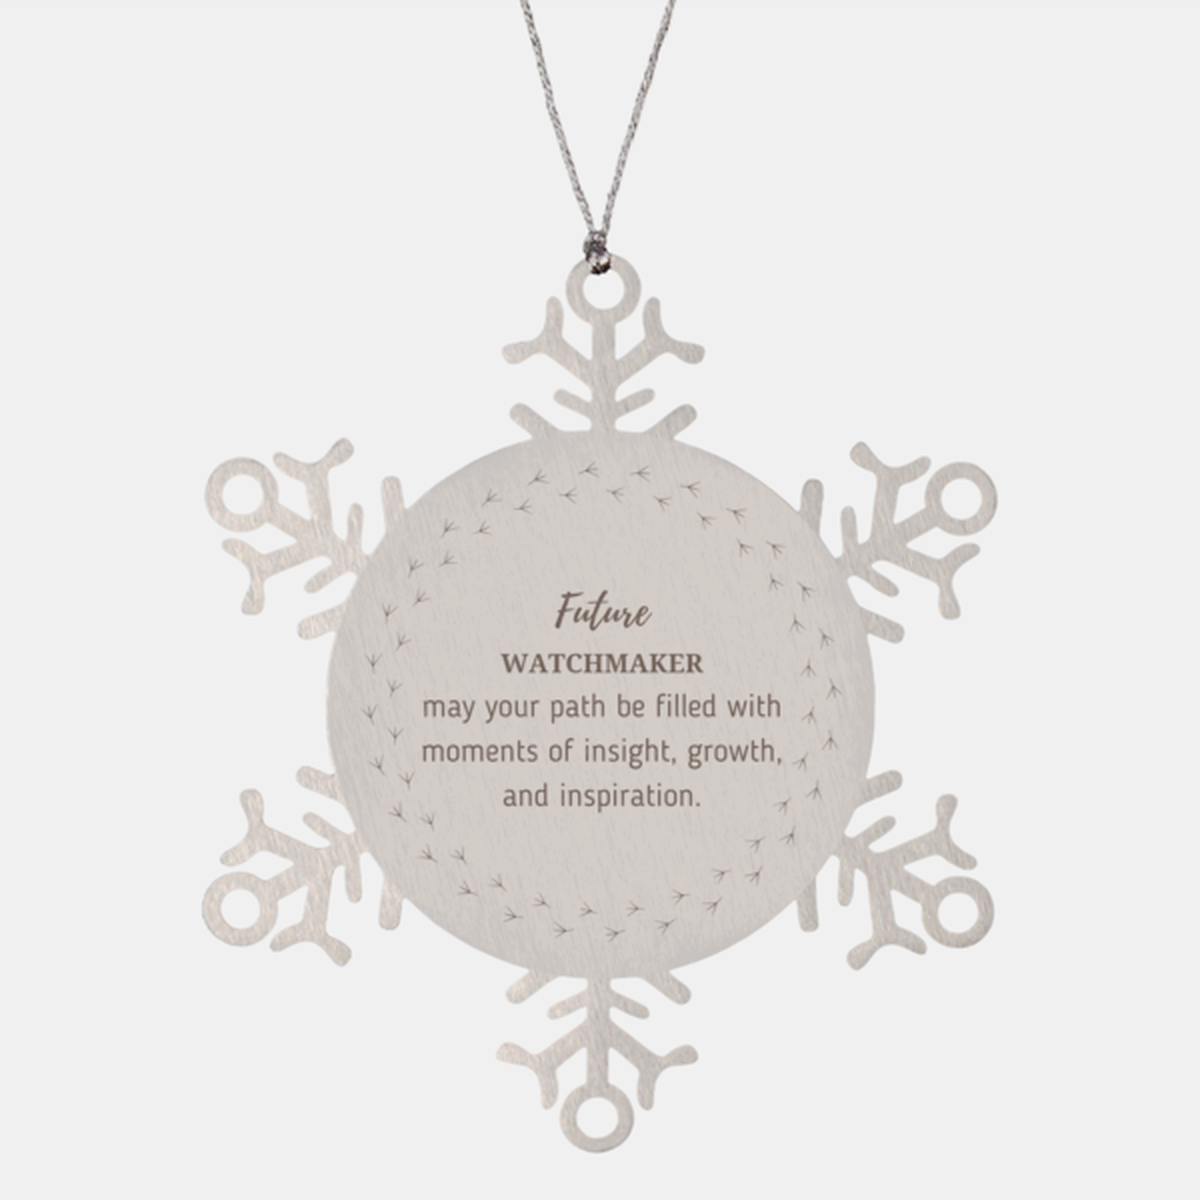 Future Watchmaker Gifts, May your path be filled with moments of insight, Graduation Gifts for New Watchmaker, Christmas Unique Snowflake Ornament For Men, Women, Friends